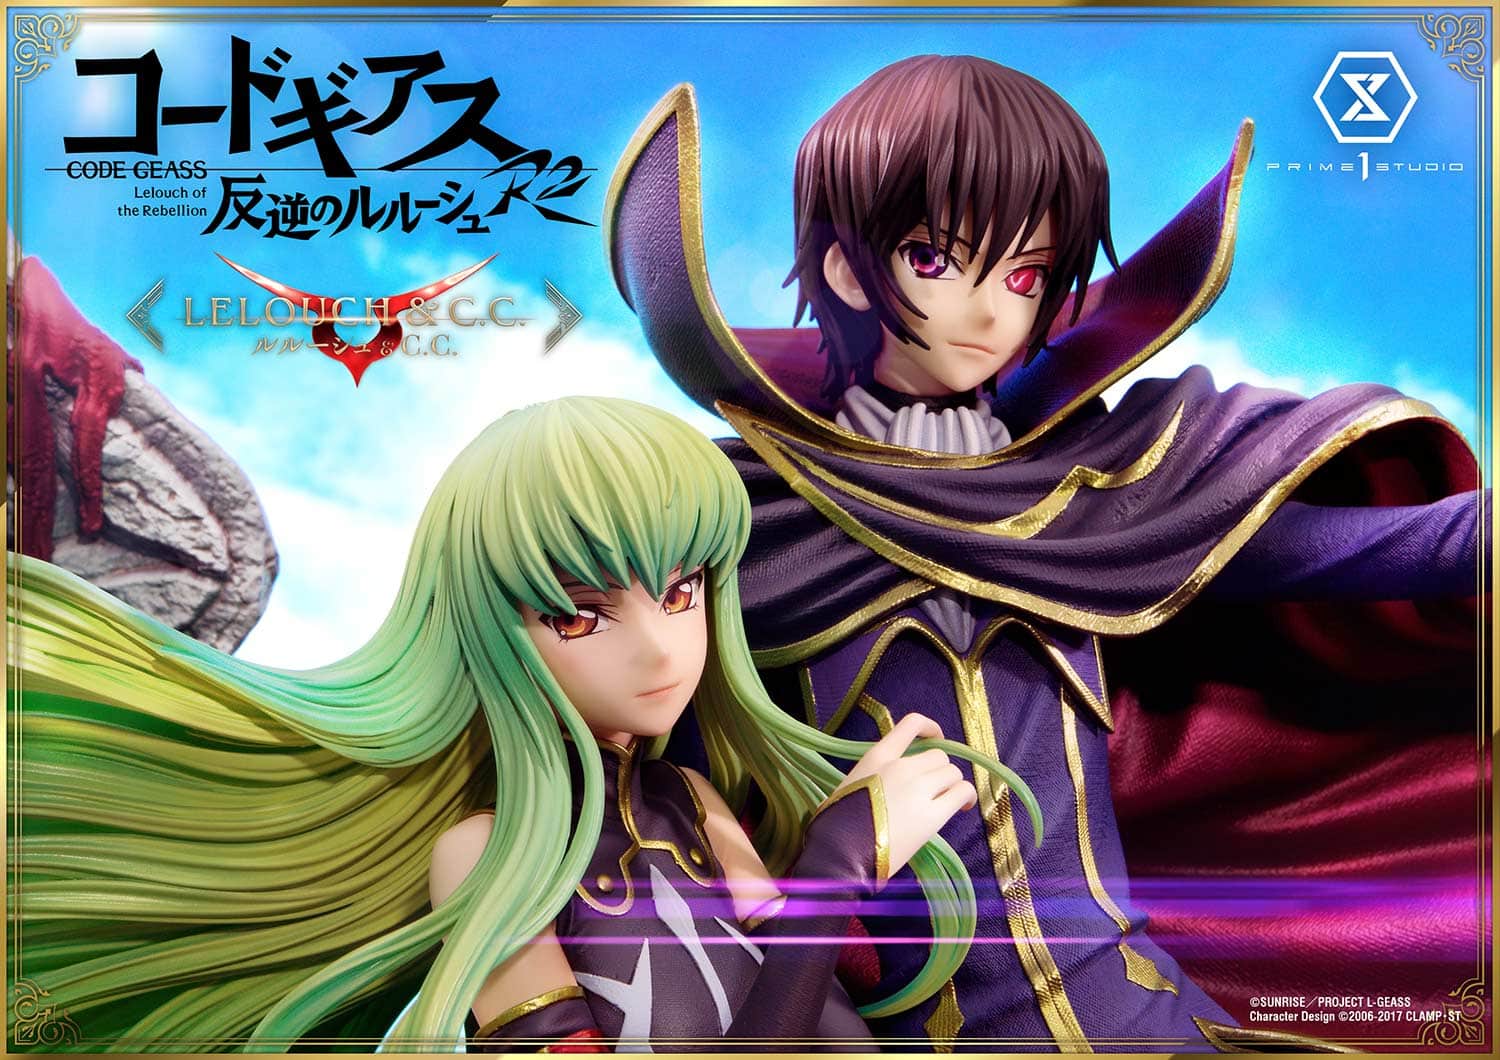 Review of Code Geass - Lelouch of the Resurrection